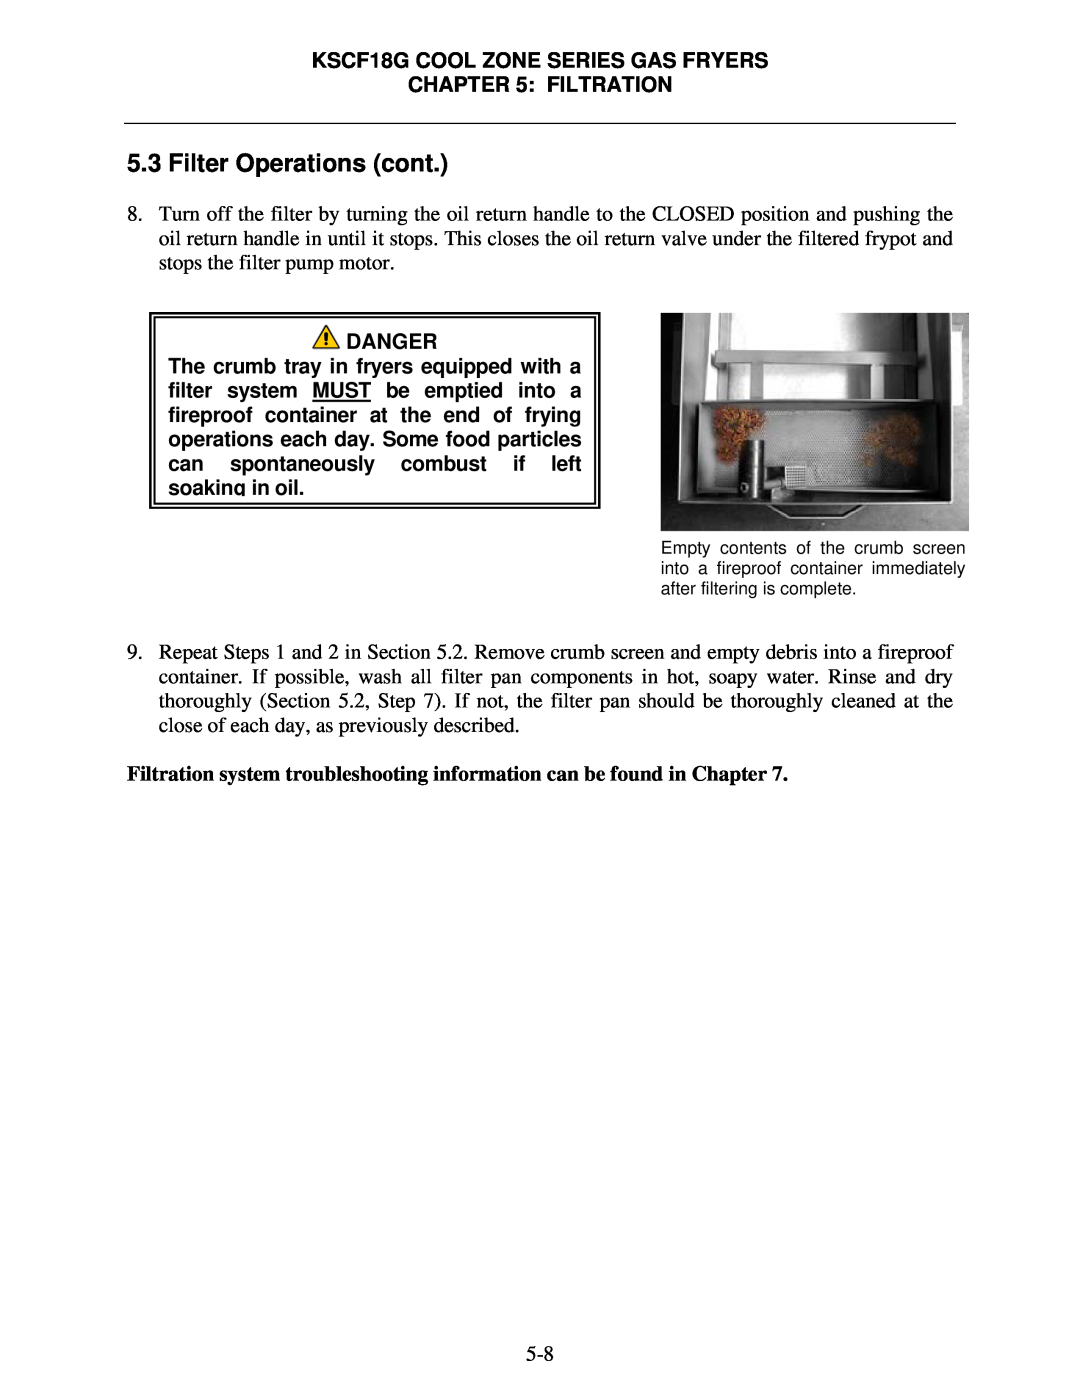 Frymaster manual Filter Operations cont, KSCF18G COOL ZONE SERIES GAS FRYERS, Filtration, Danger 